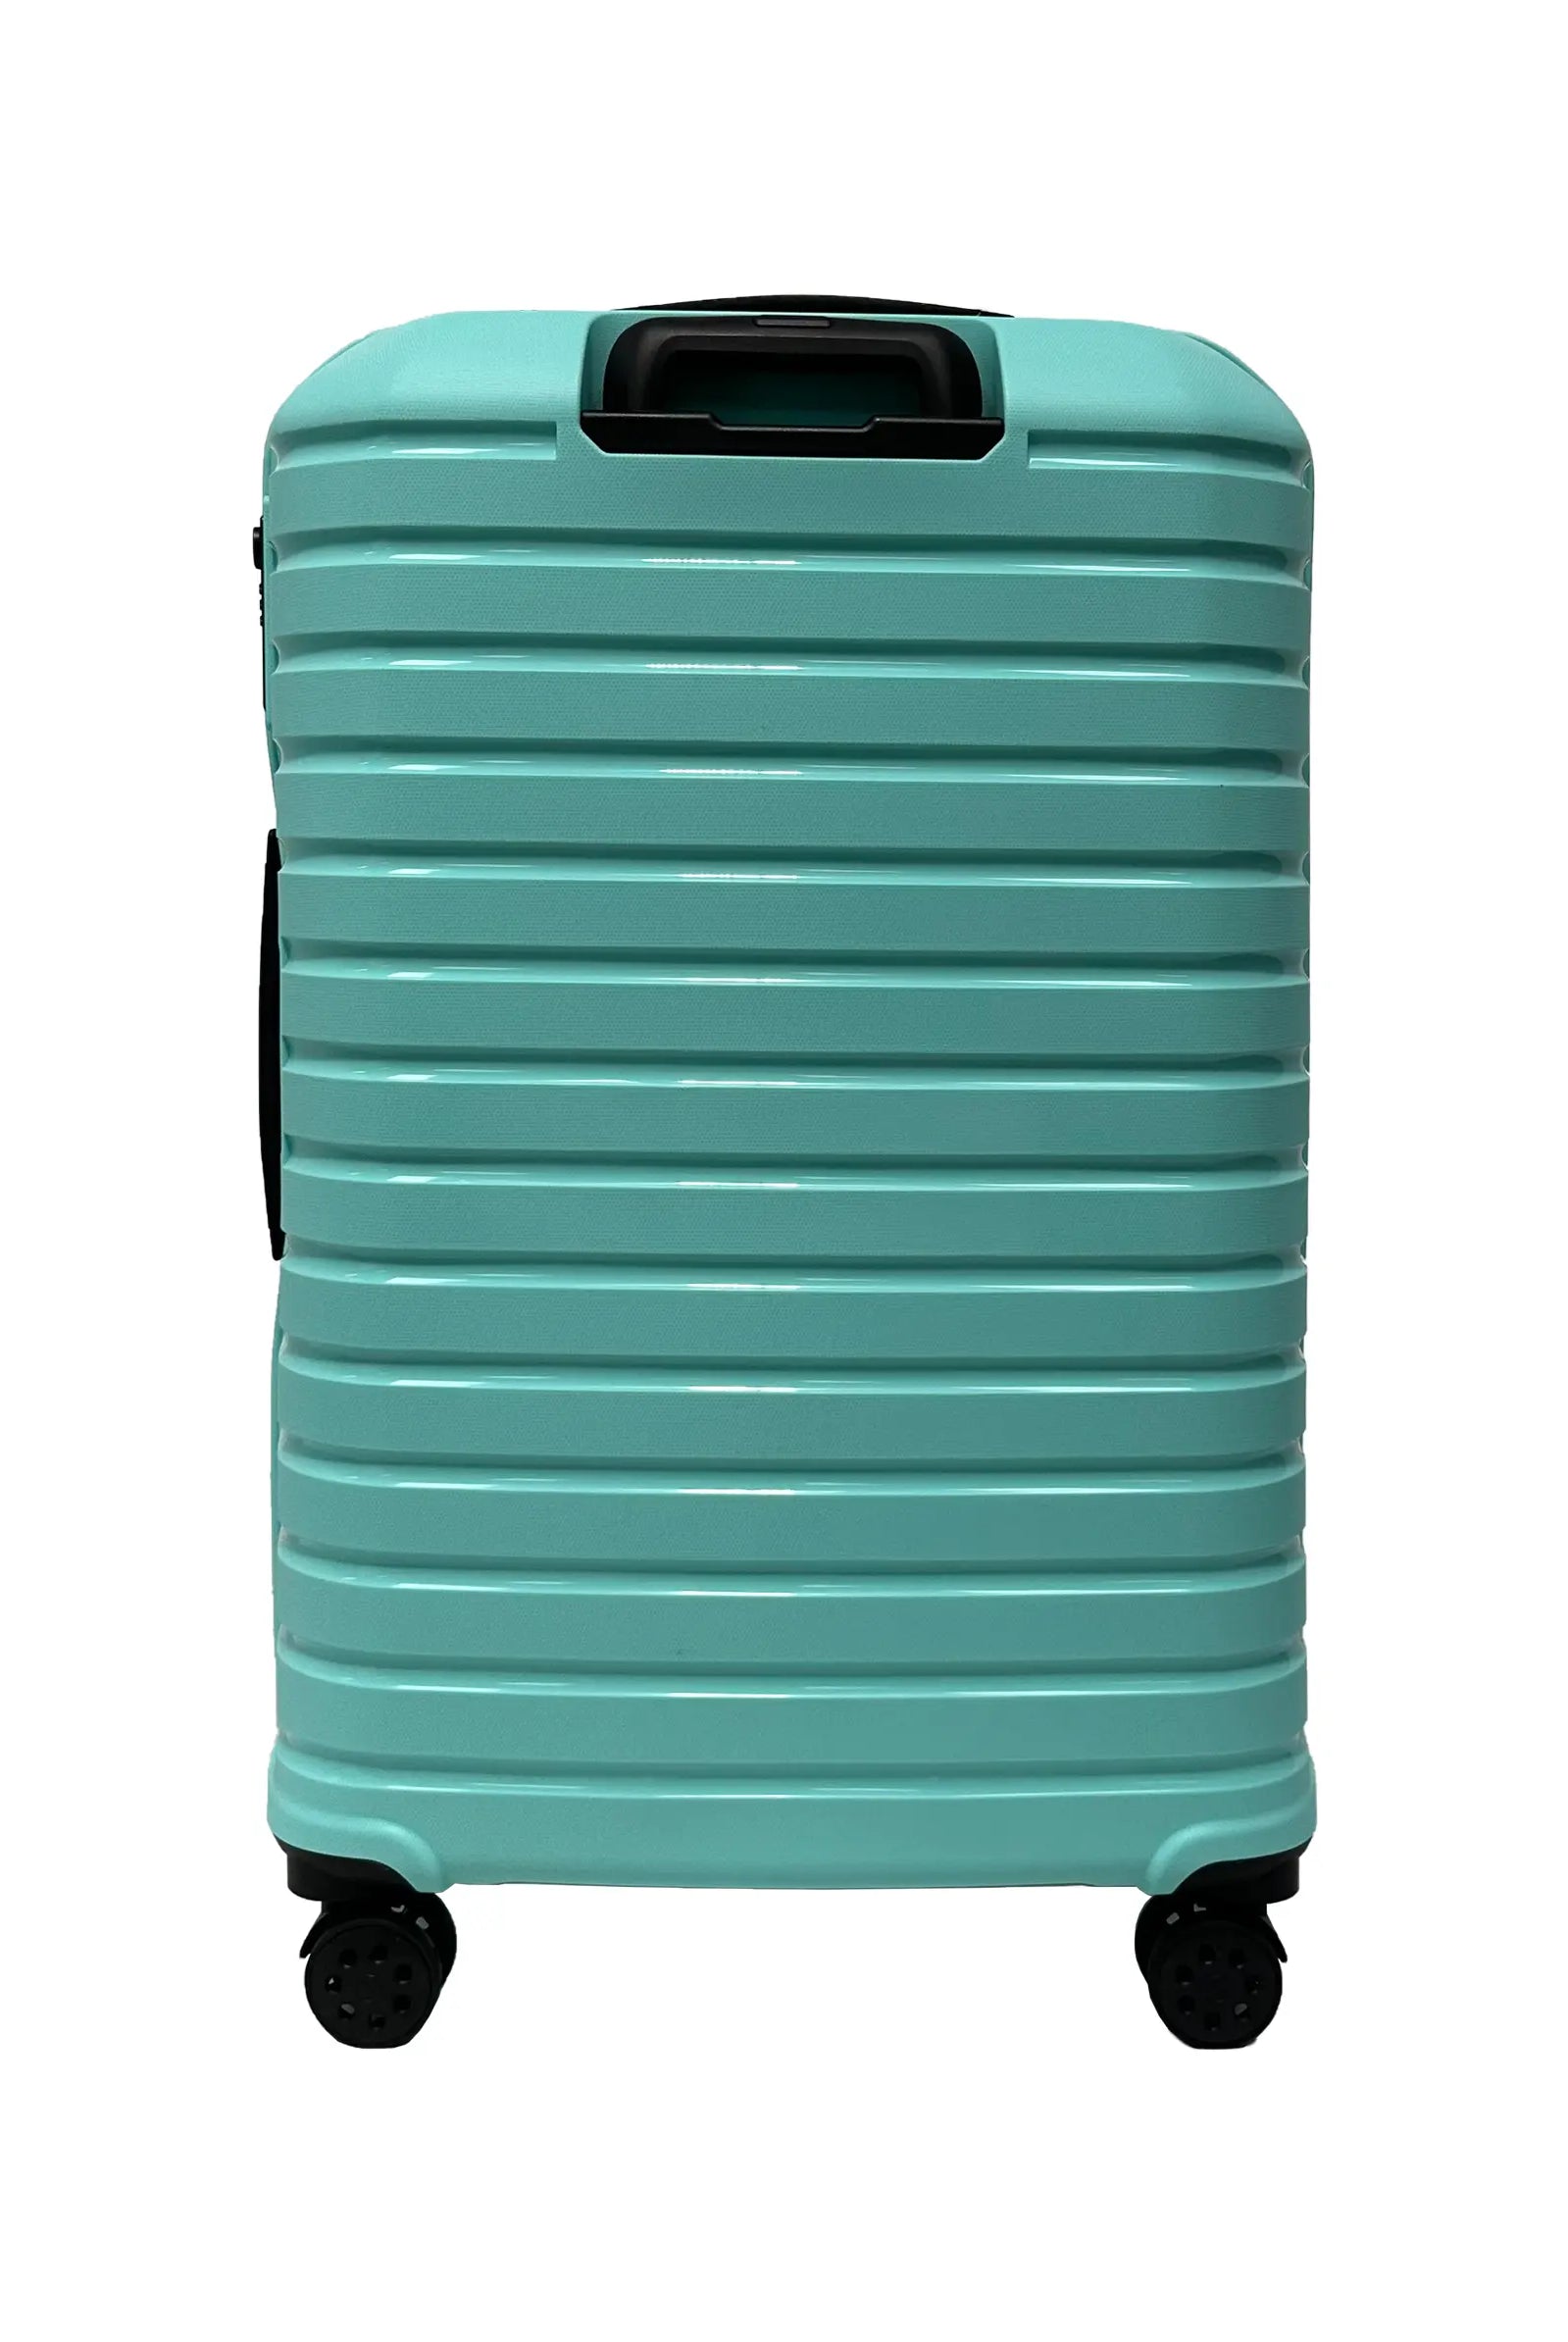 Large green suitcase